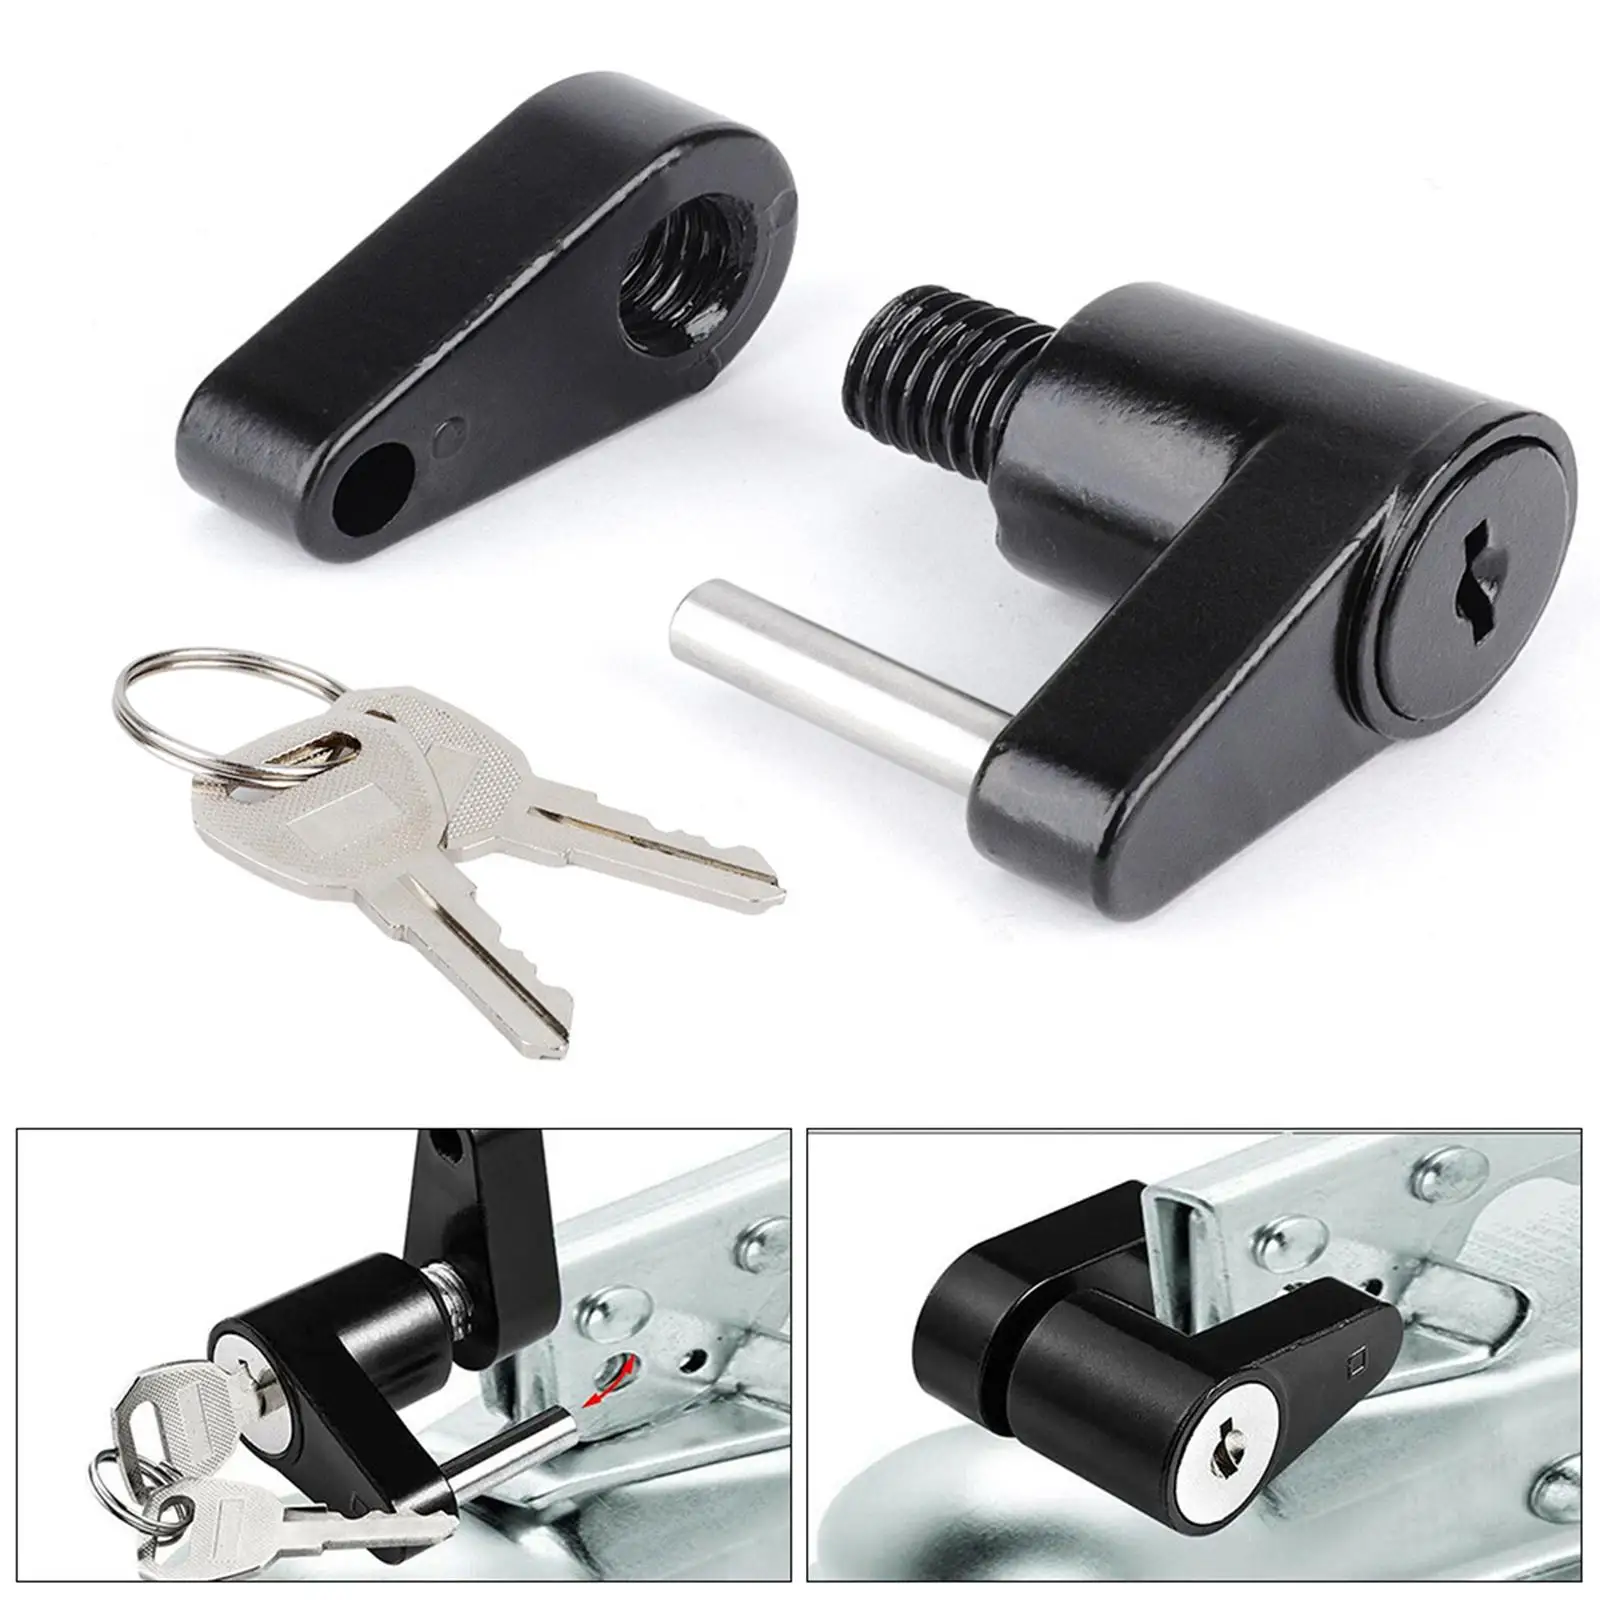 Trailer Hitch Coupler Lock with 2 Keys for Car Coupling lock RV